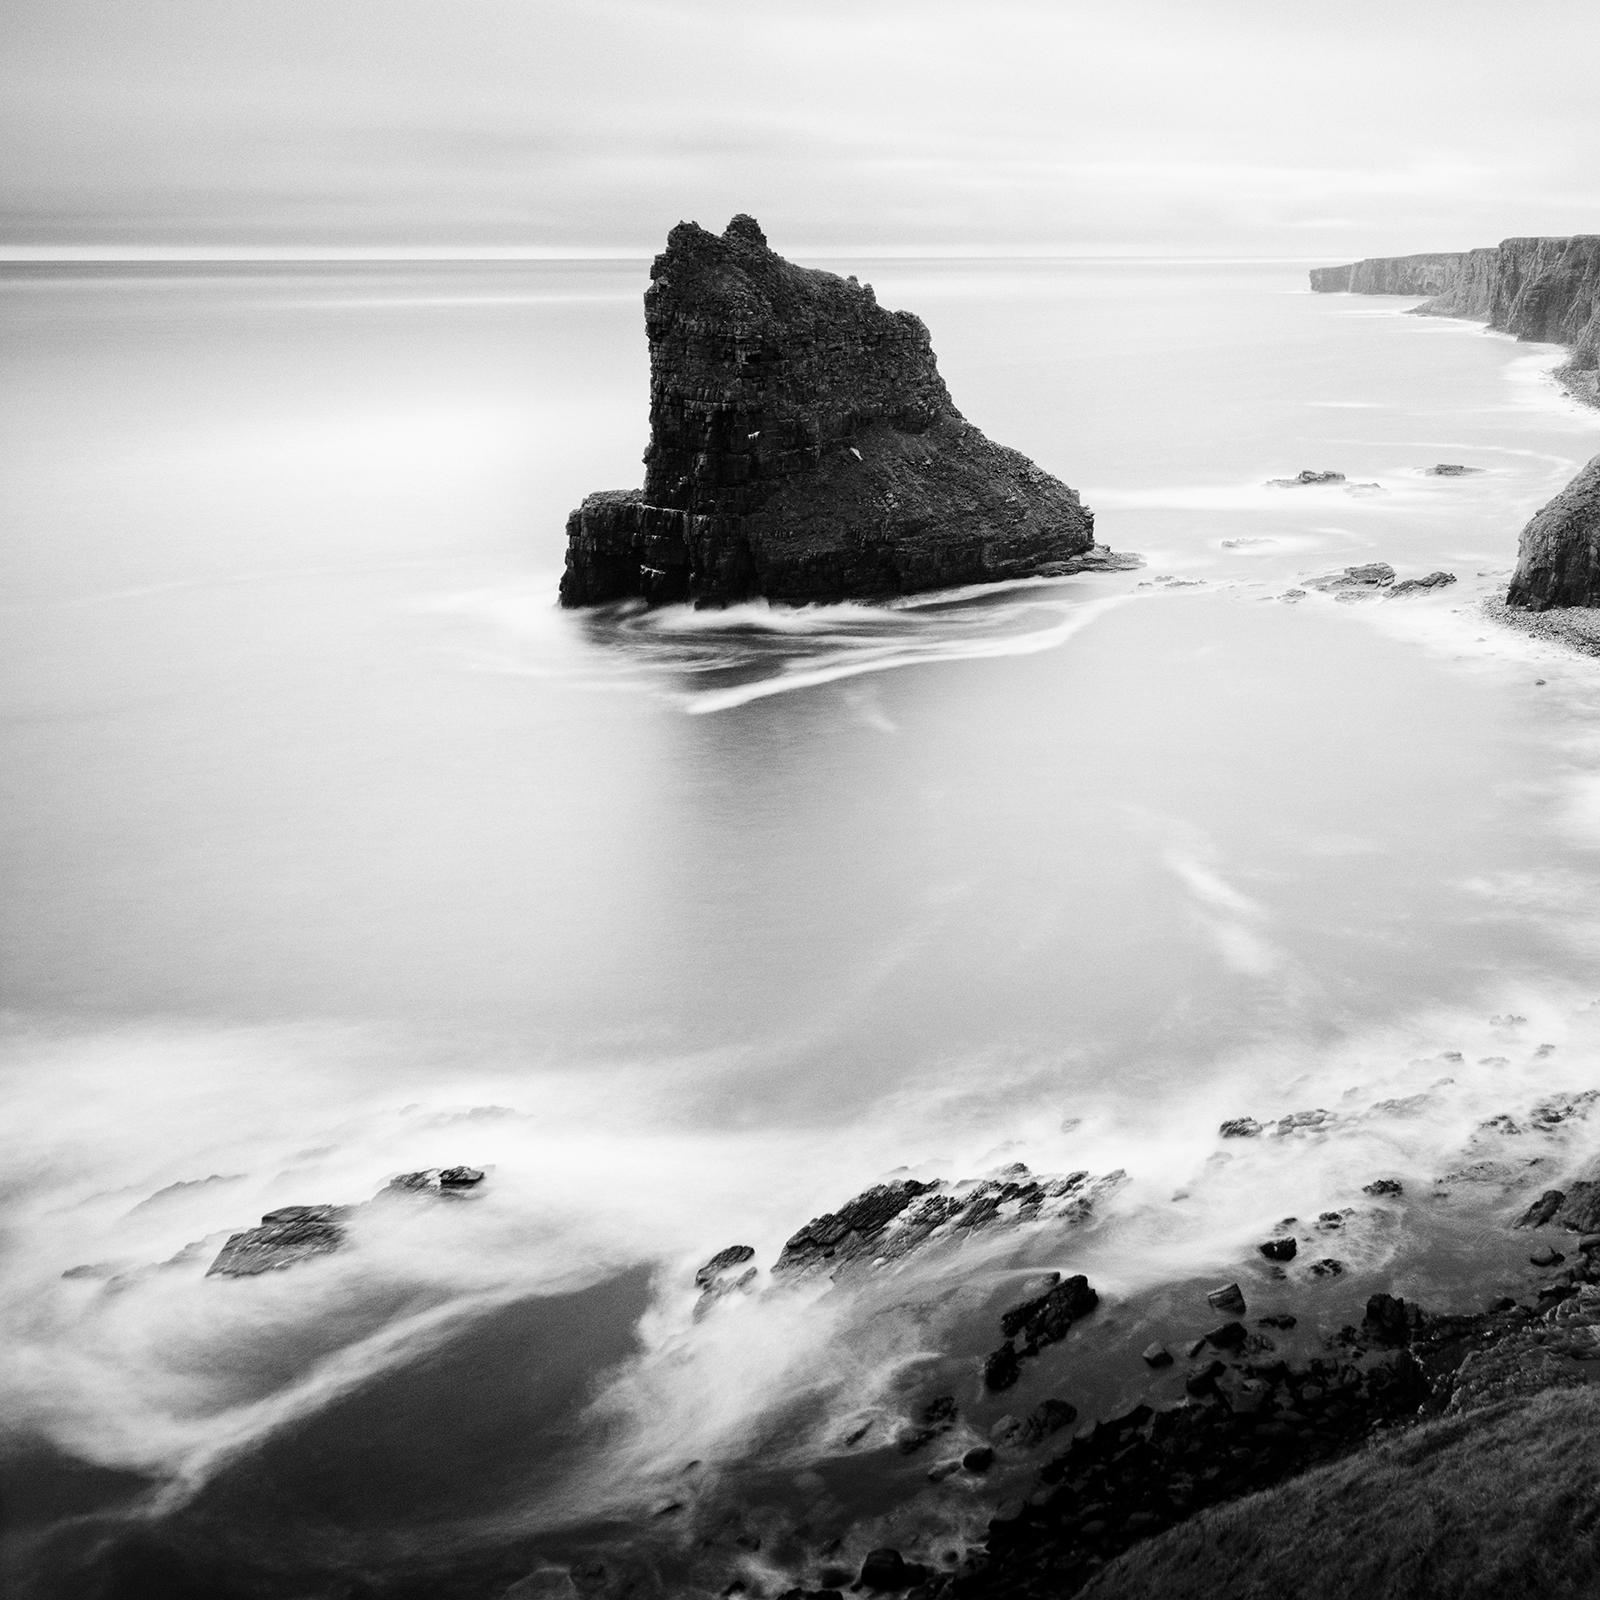 Surreal Moment, Cliff, Island, Scotland, black and white photography, landscape For Sale 2